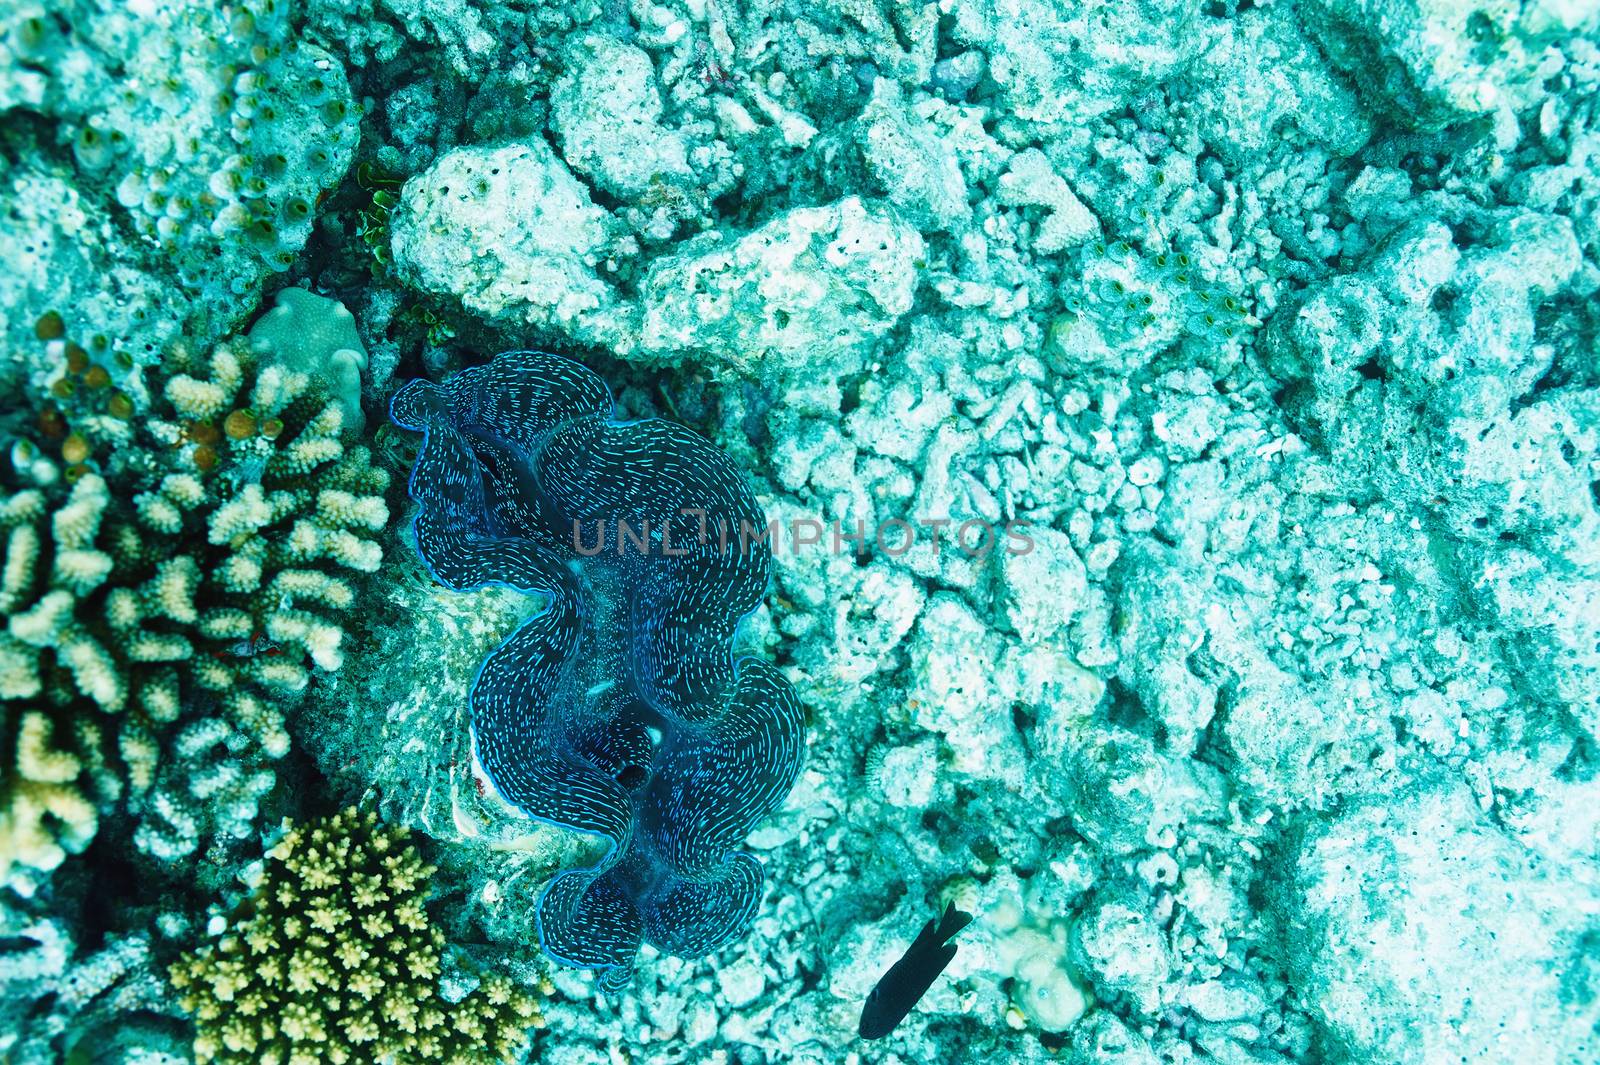 Giant clam by haveseen